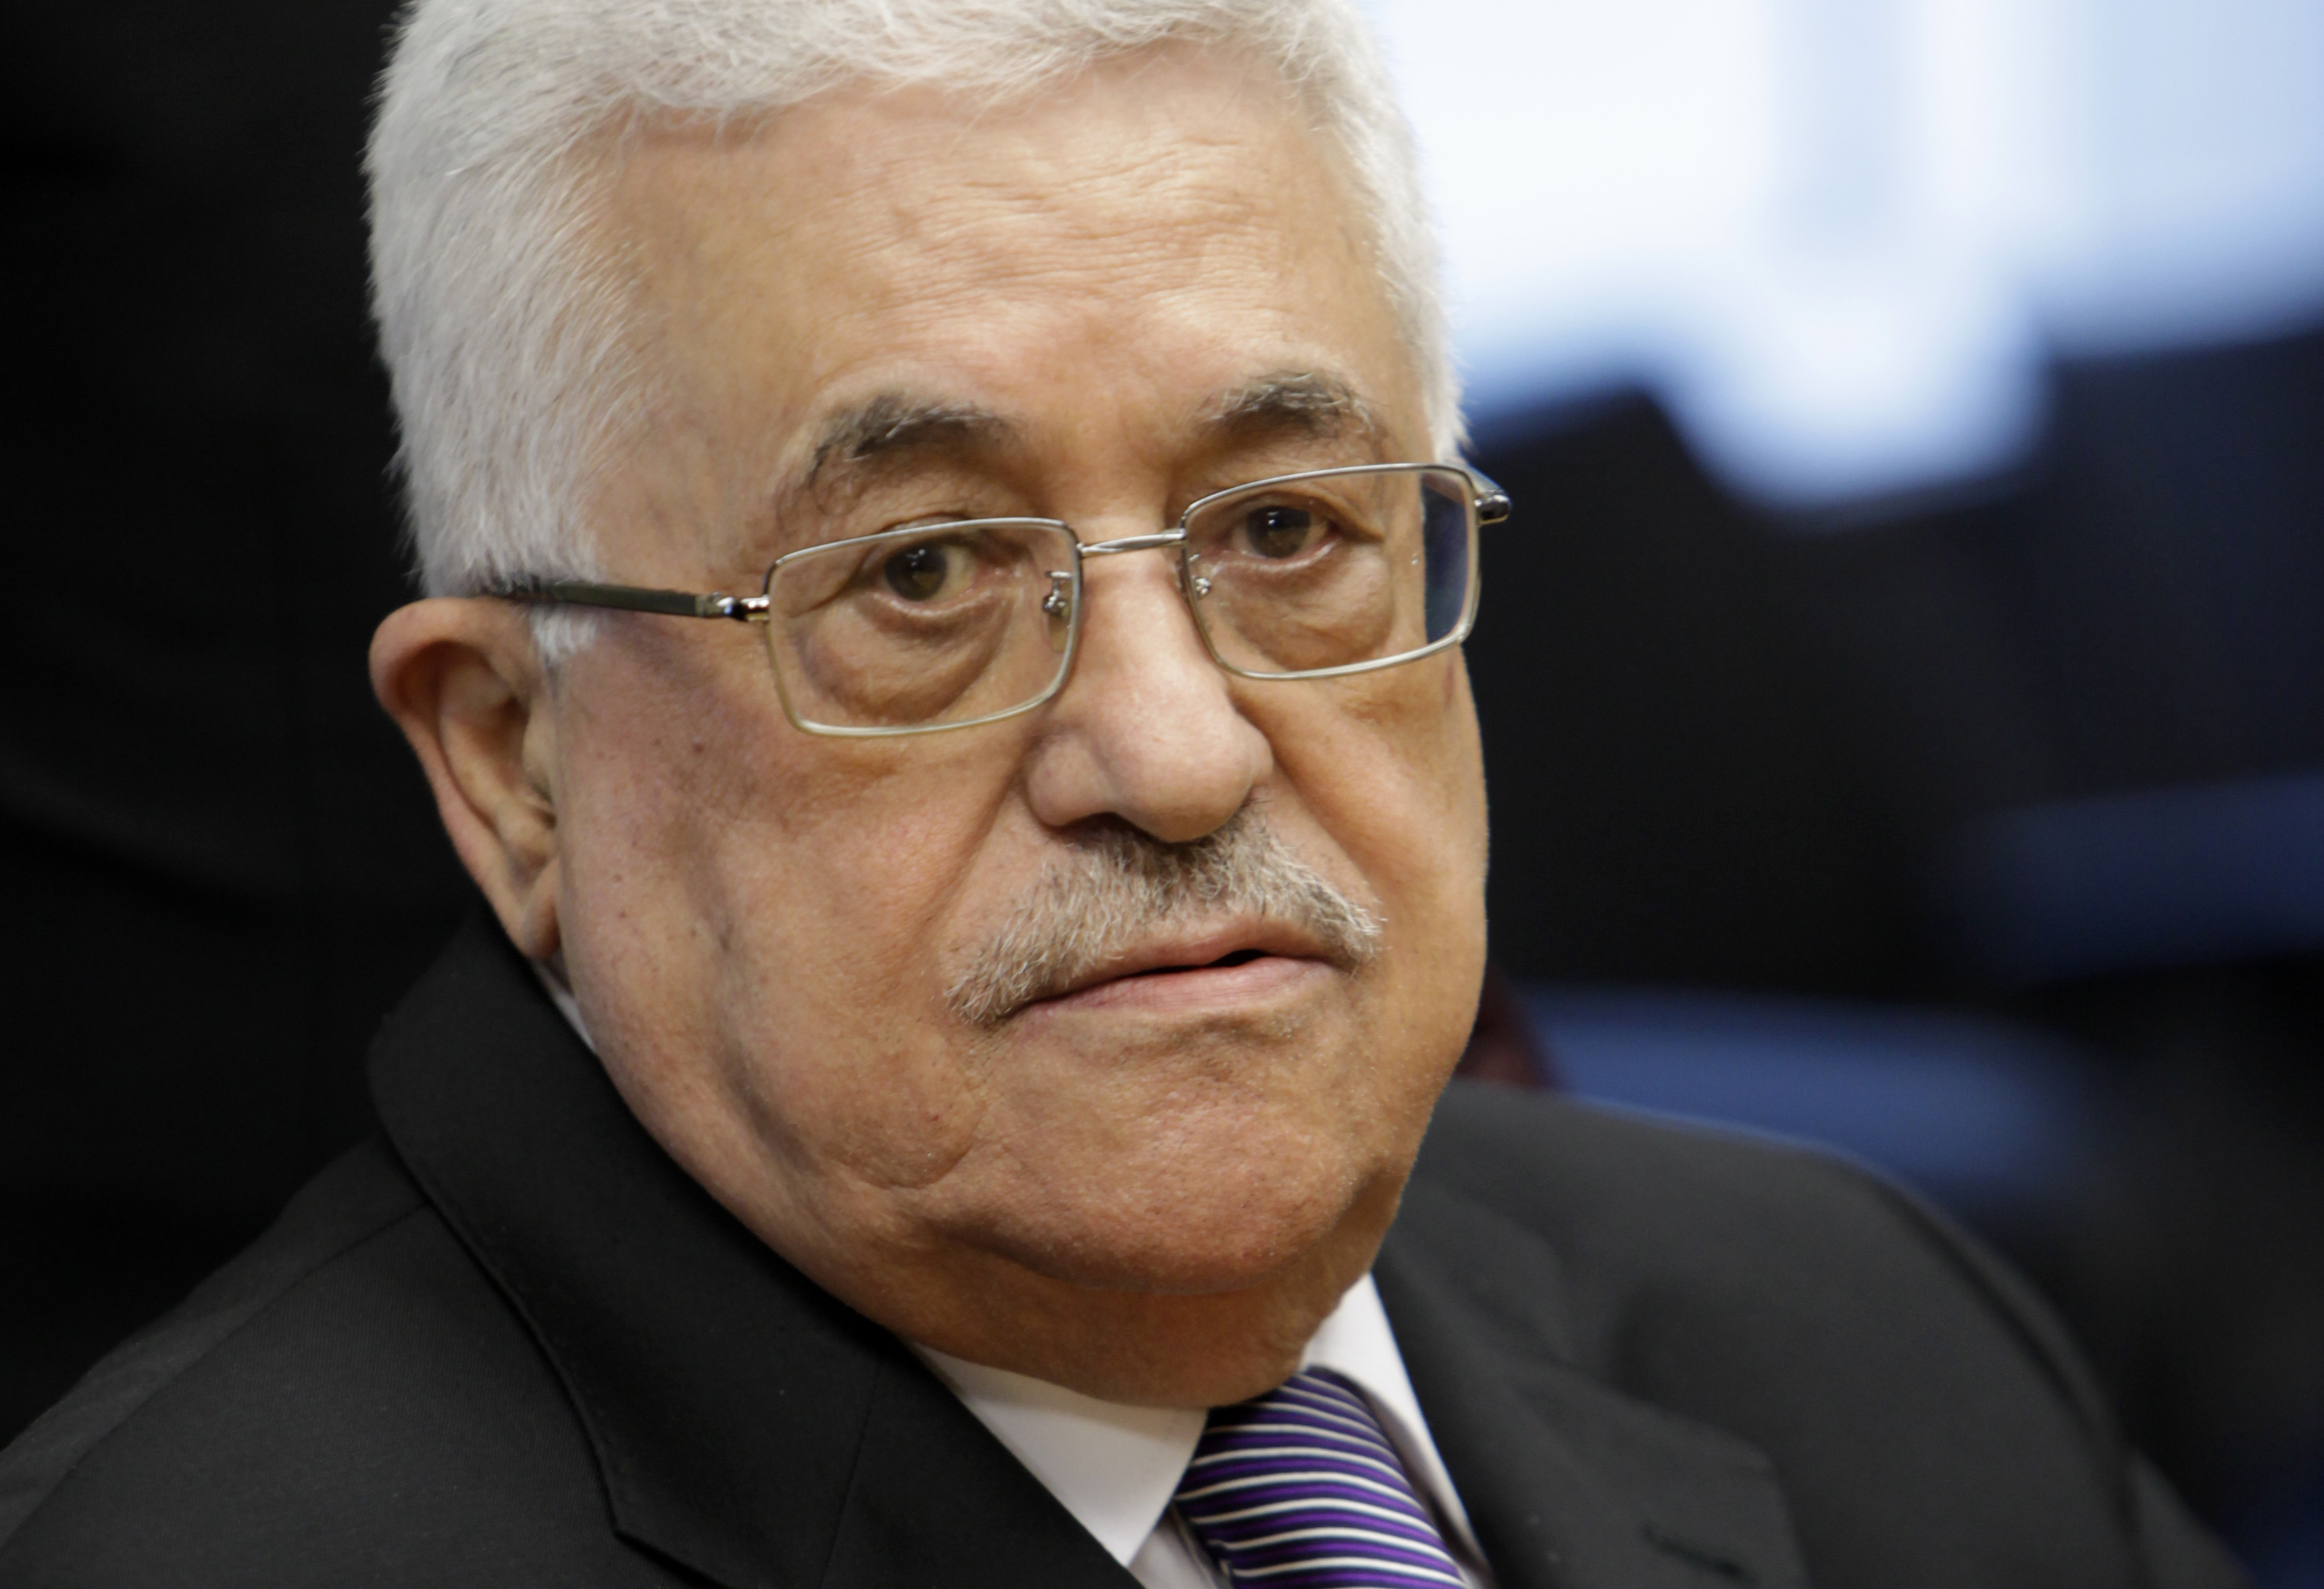 Palestinian President Mahmoud Abbas sits down after giving a letter requesting recognition of Palestine as a state to Secretary-General Ban Ki-moon during the 66th session of the General Assembly at United Nations headquarters Friday, Sept. 23, 2011. (AP Photo/Seth Wenig)